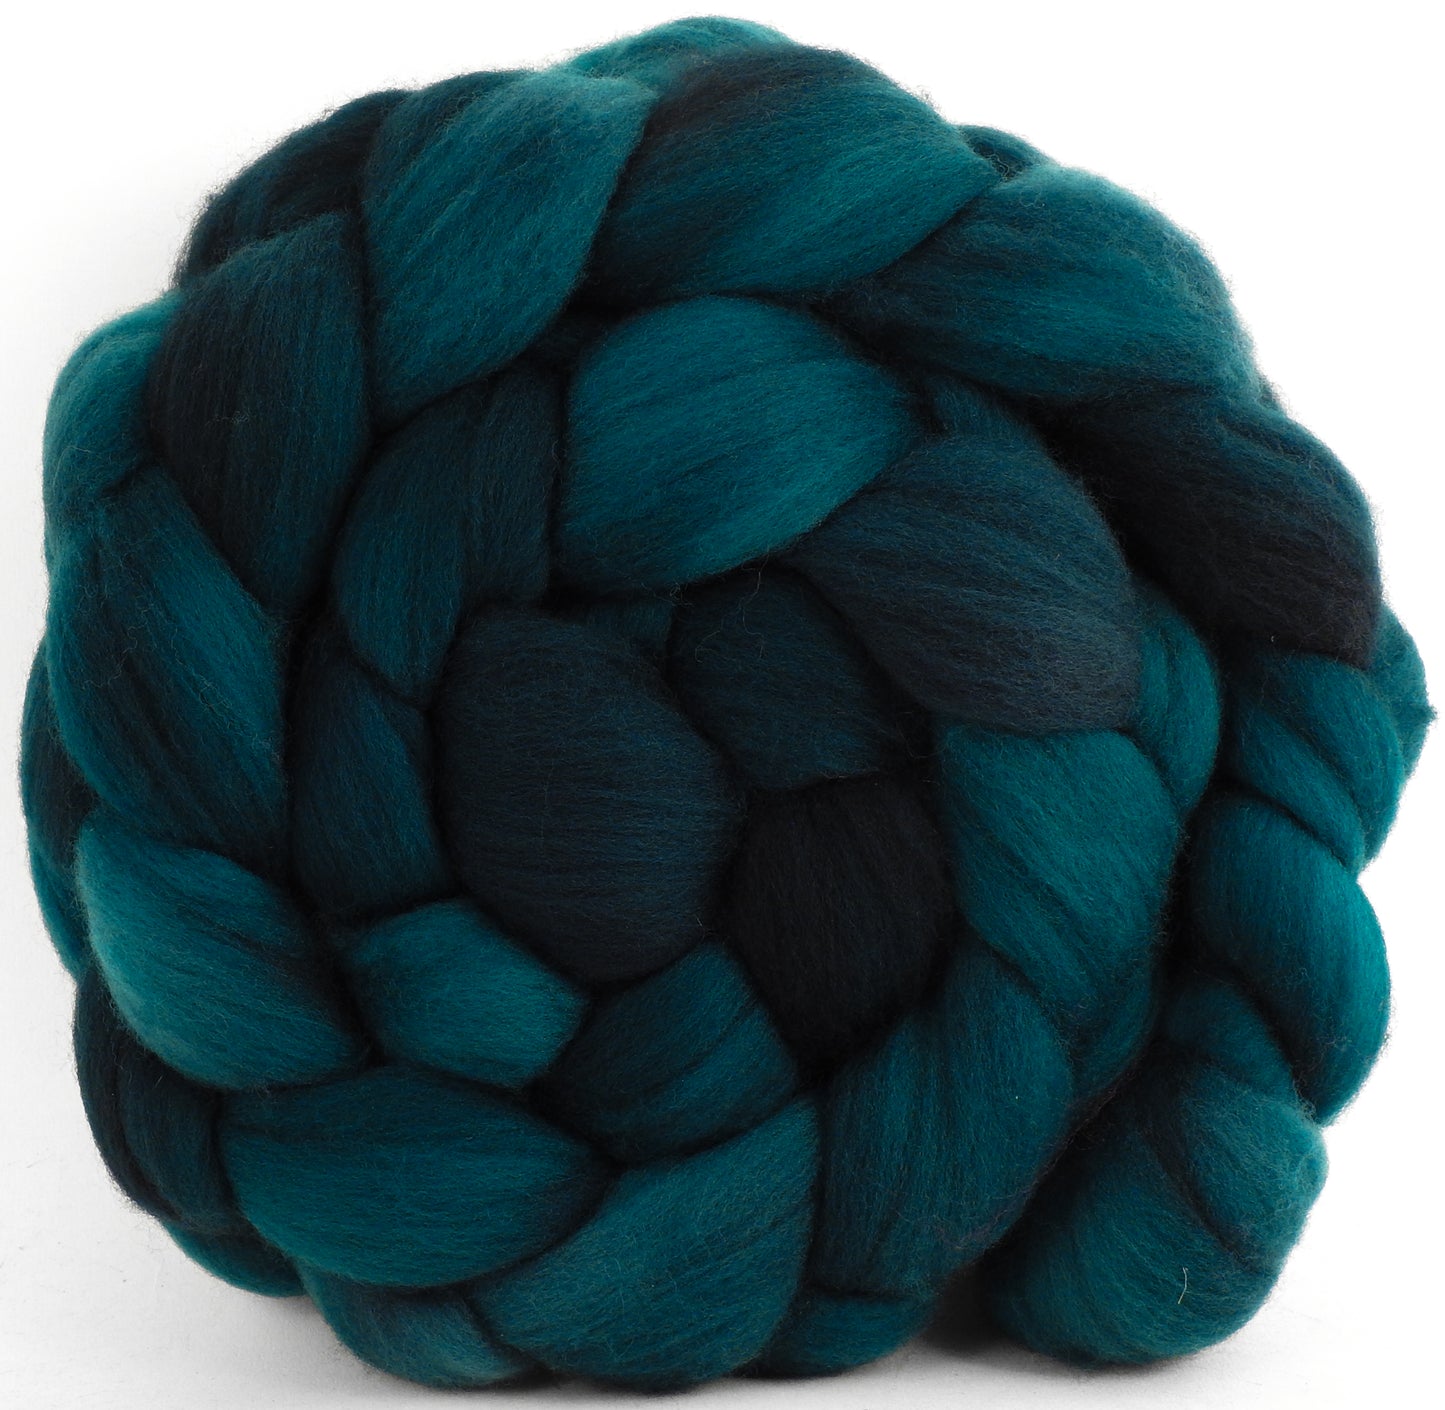 RESERVED for Naomi- Blue Spruce - Organic Polwarth - 5 oz.